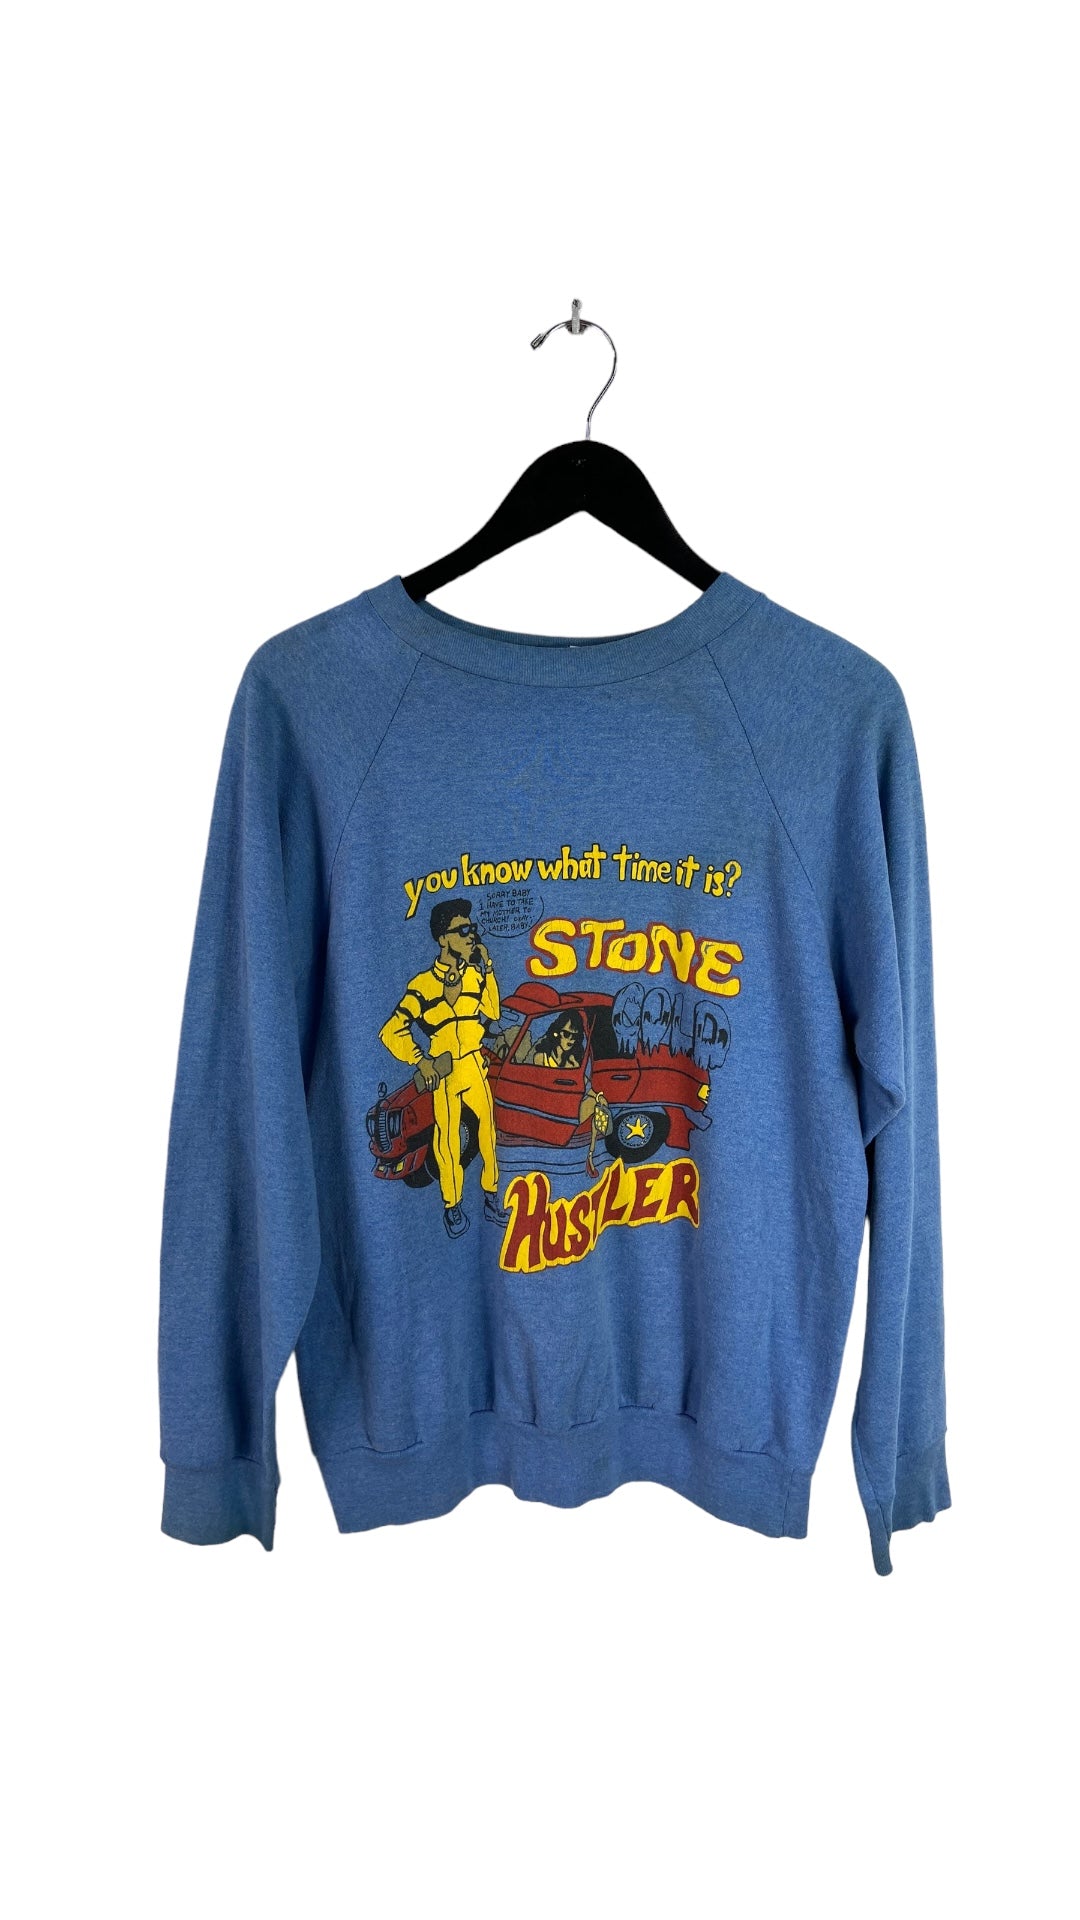 VTG Stone Hustler You Know What Time It Is Crewneck Sz M